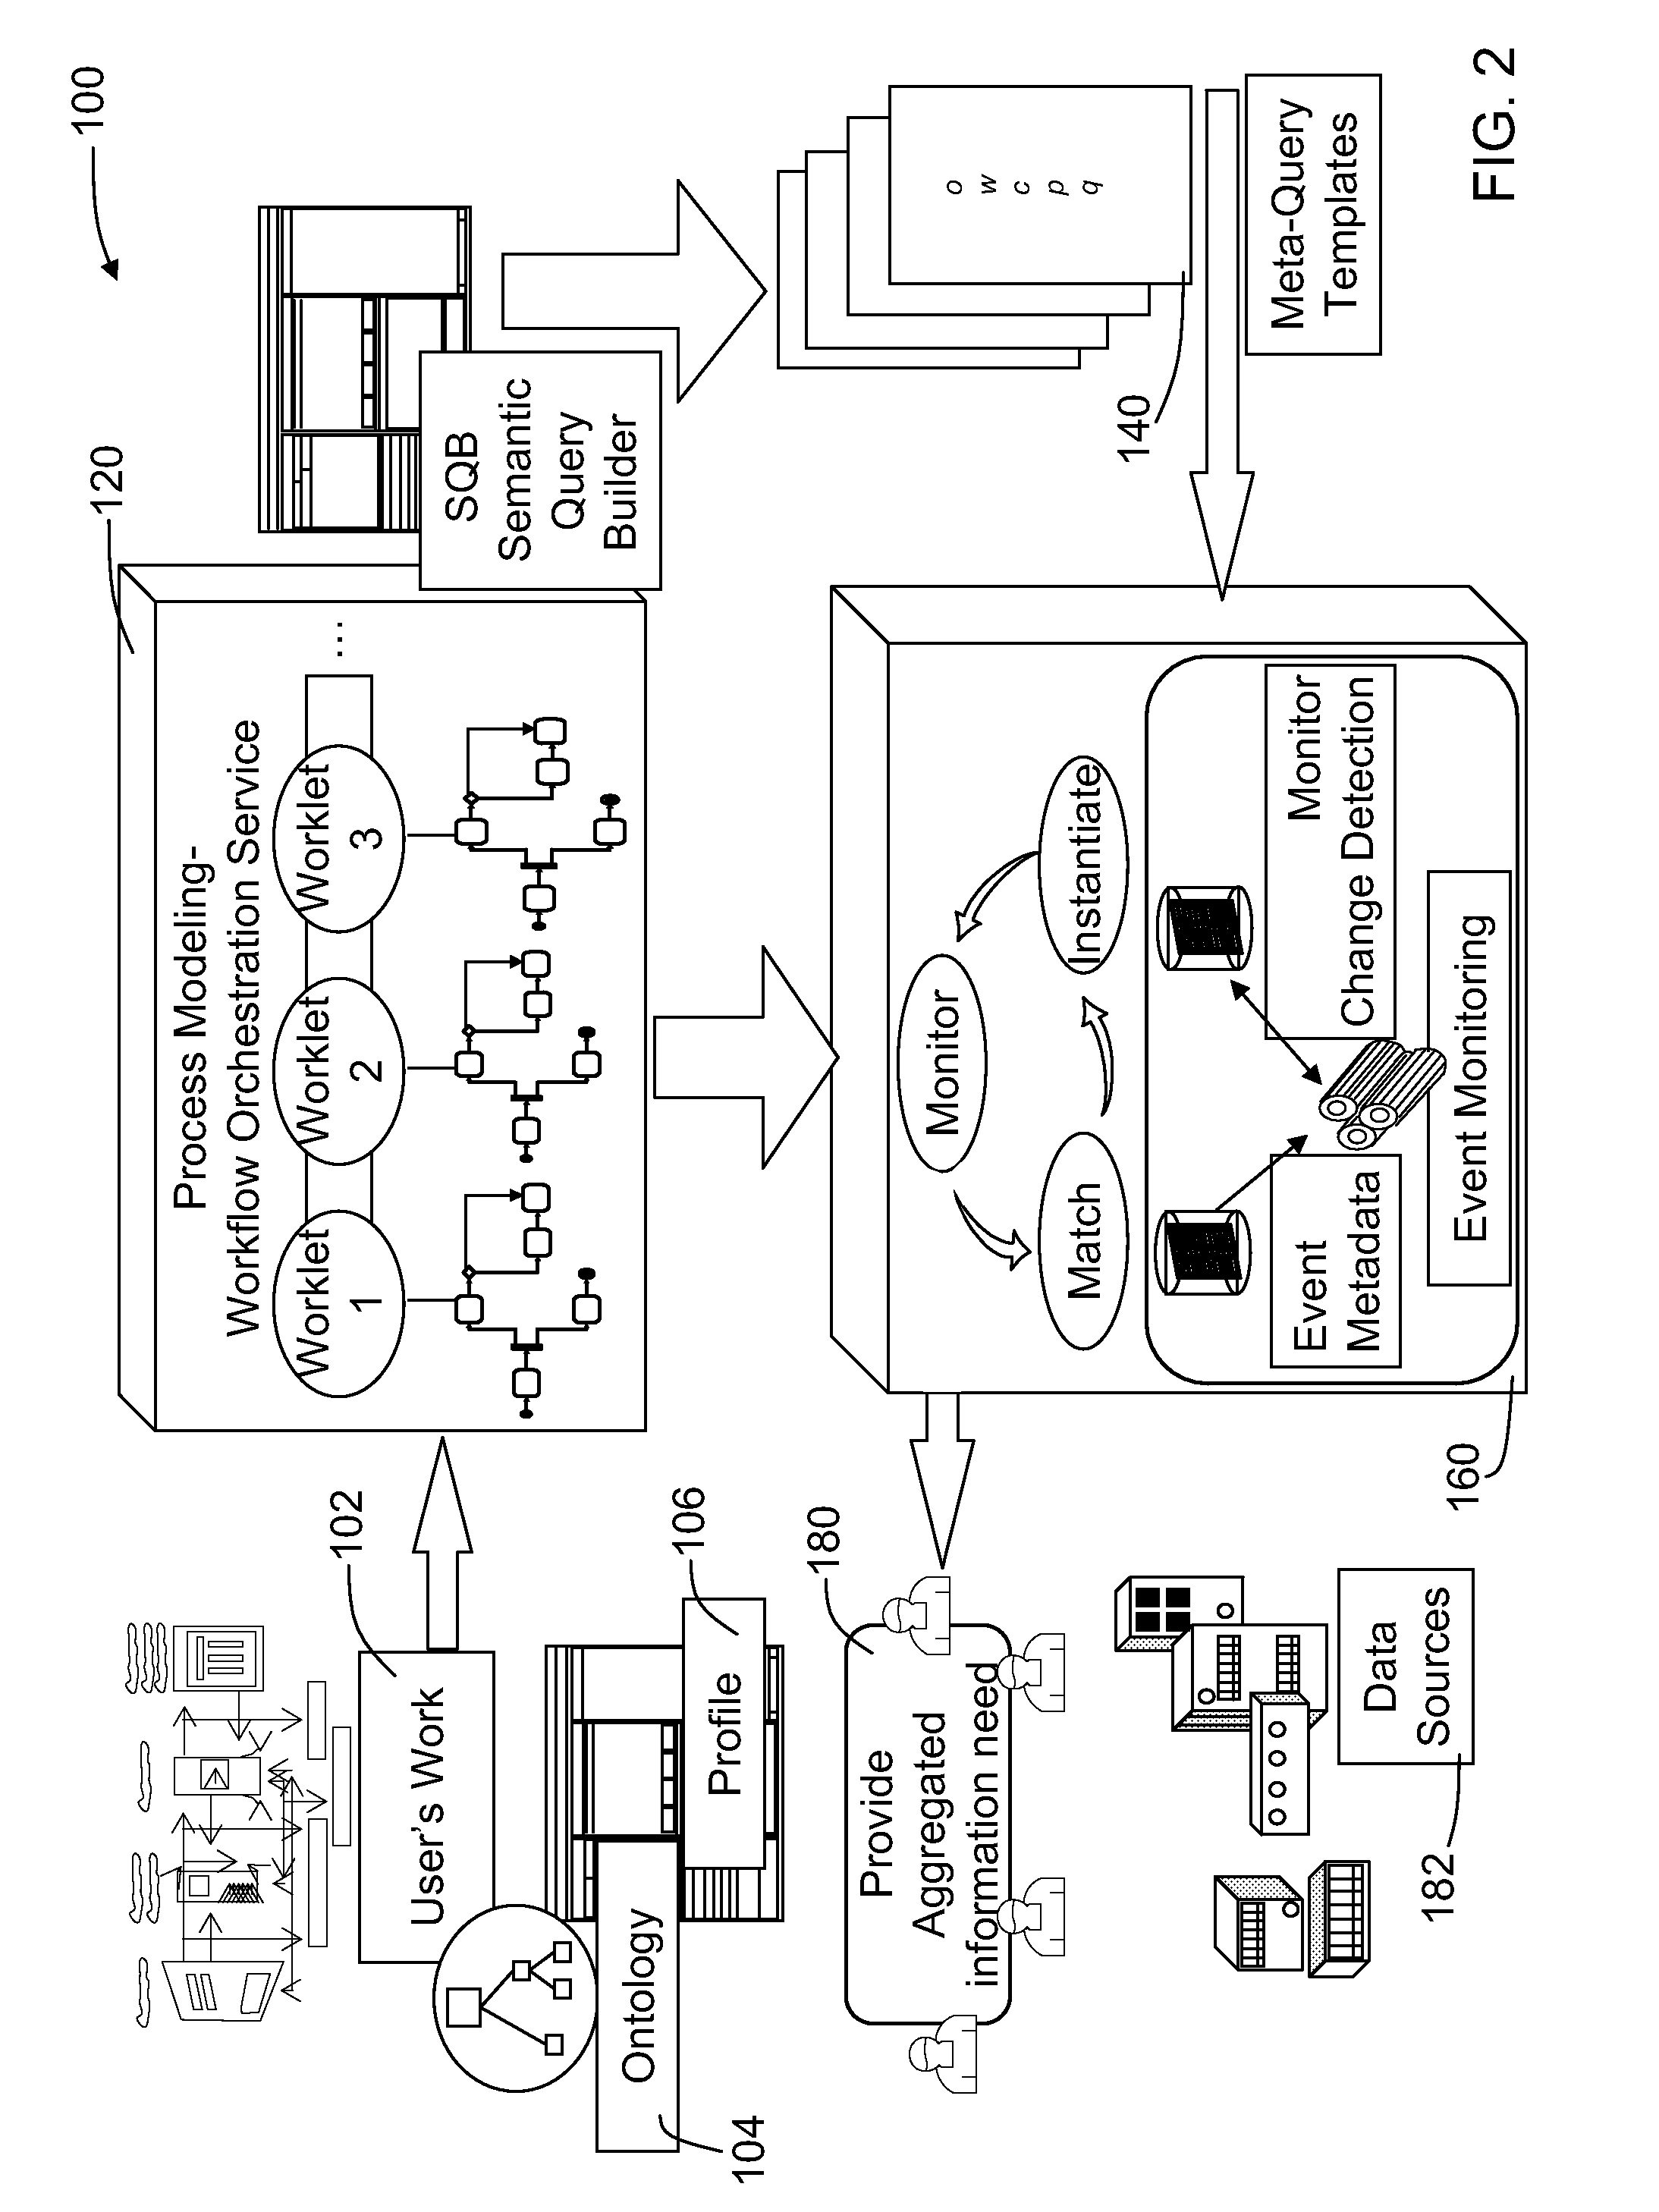 Methods and systems for context based query formulation and information retrieval